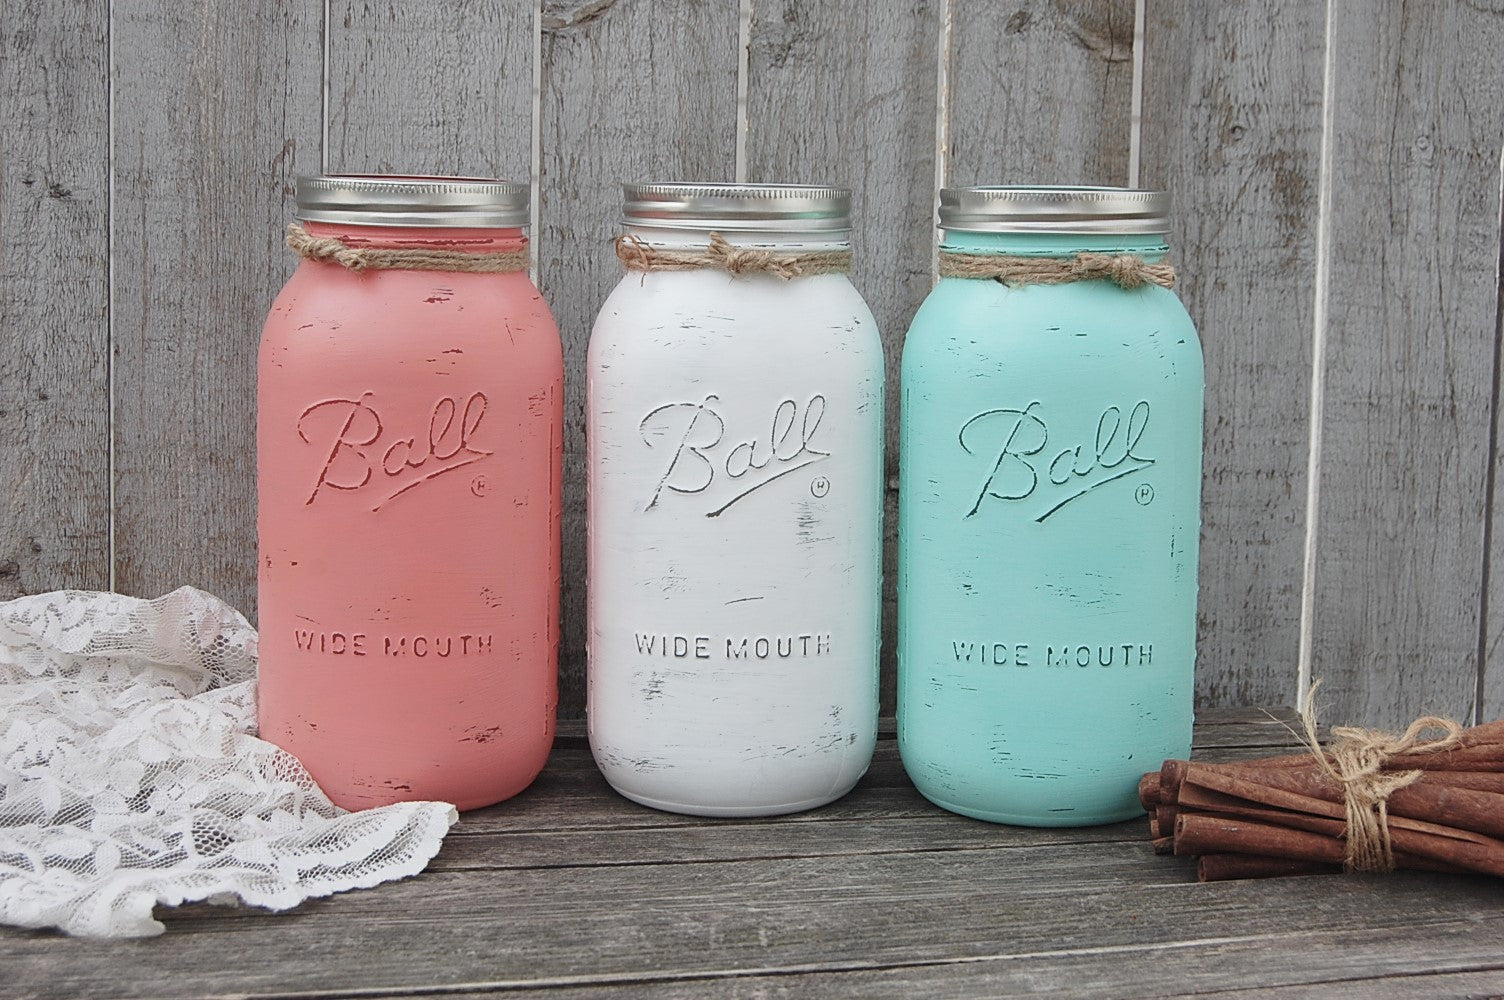 Mason jar canisters - The Vintage Artistry